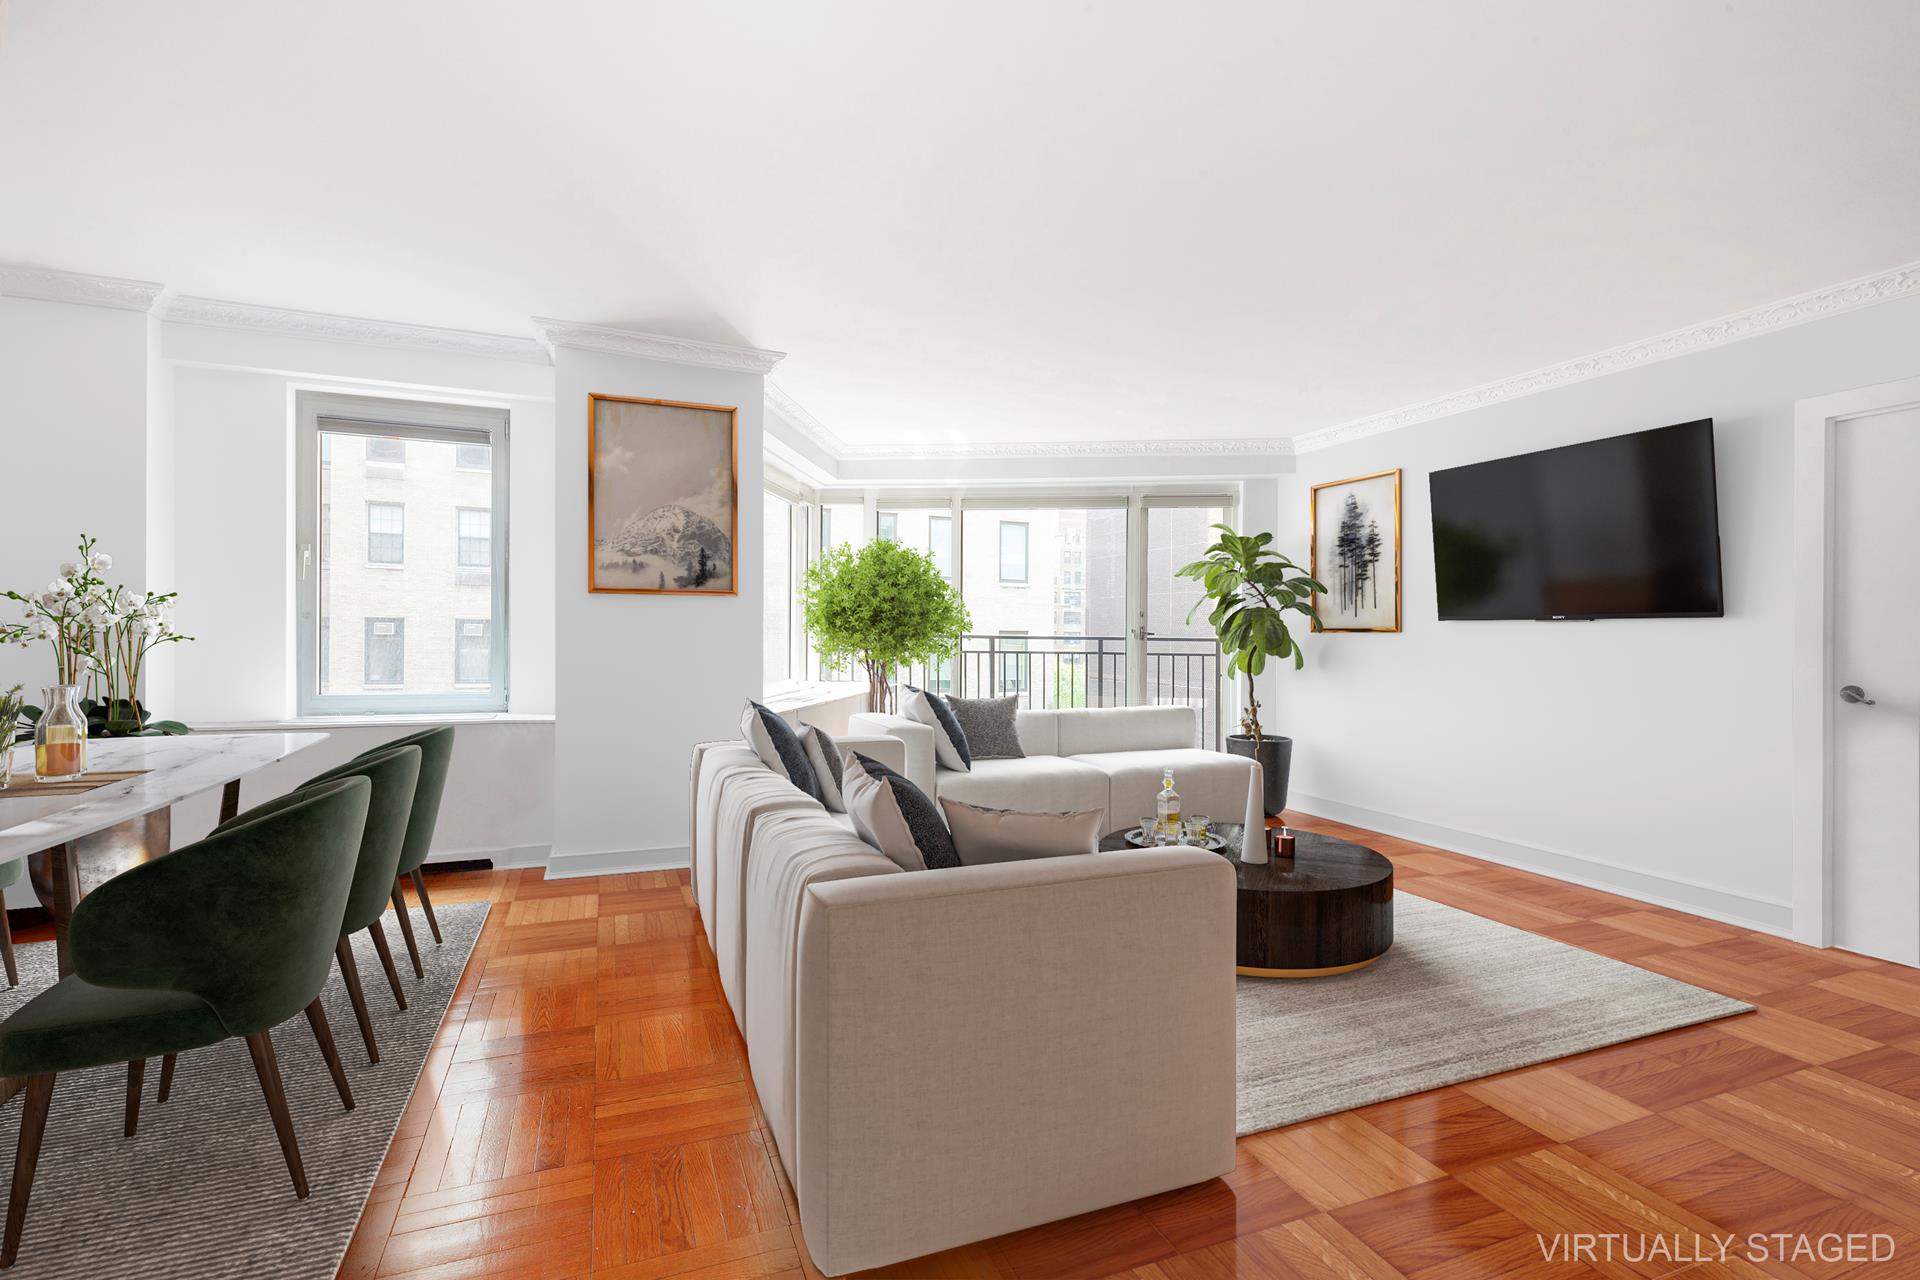 60 SUTTON Place S 11A, New York City, NY 10022